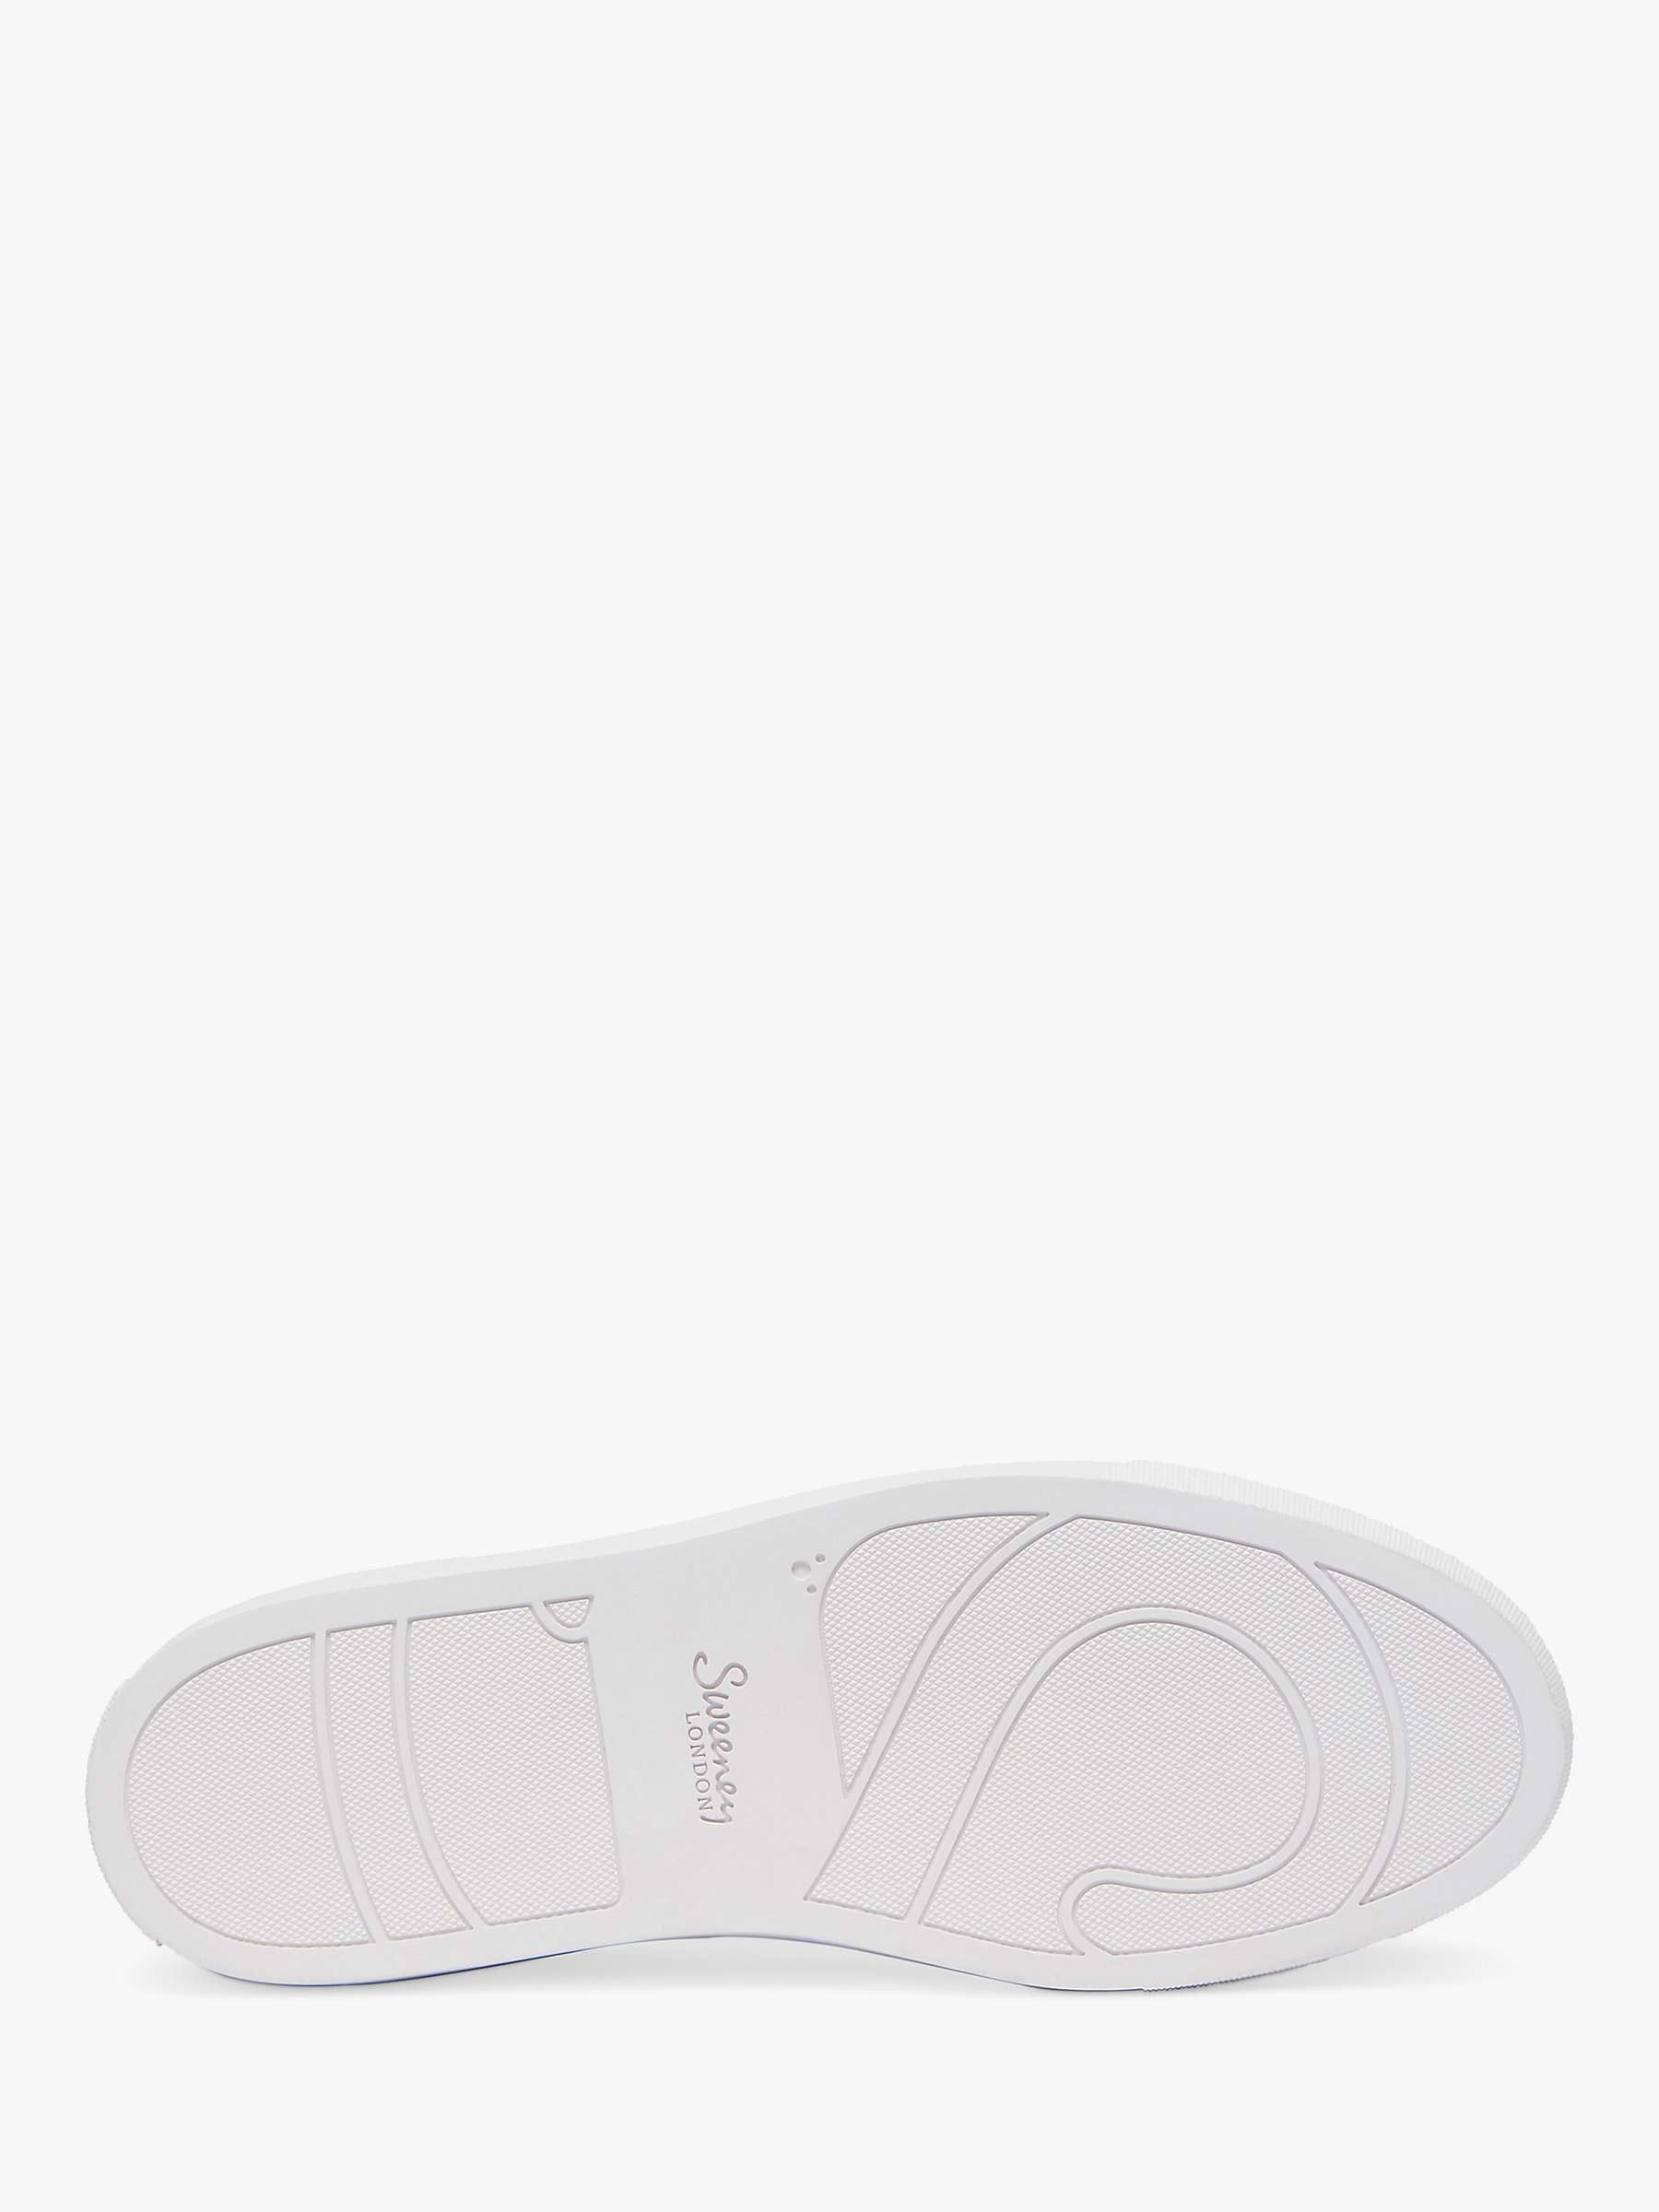 Oliver Sweeney Hayle Leather Trainers, White at John Lewis & Partners